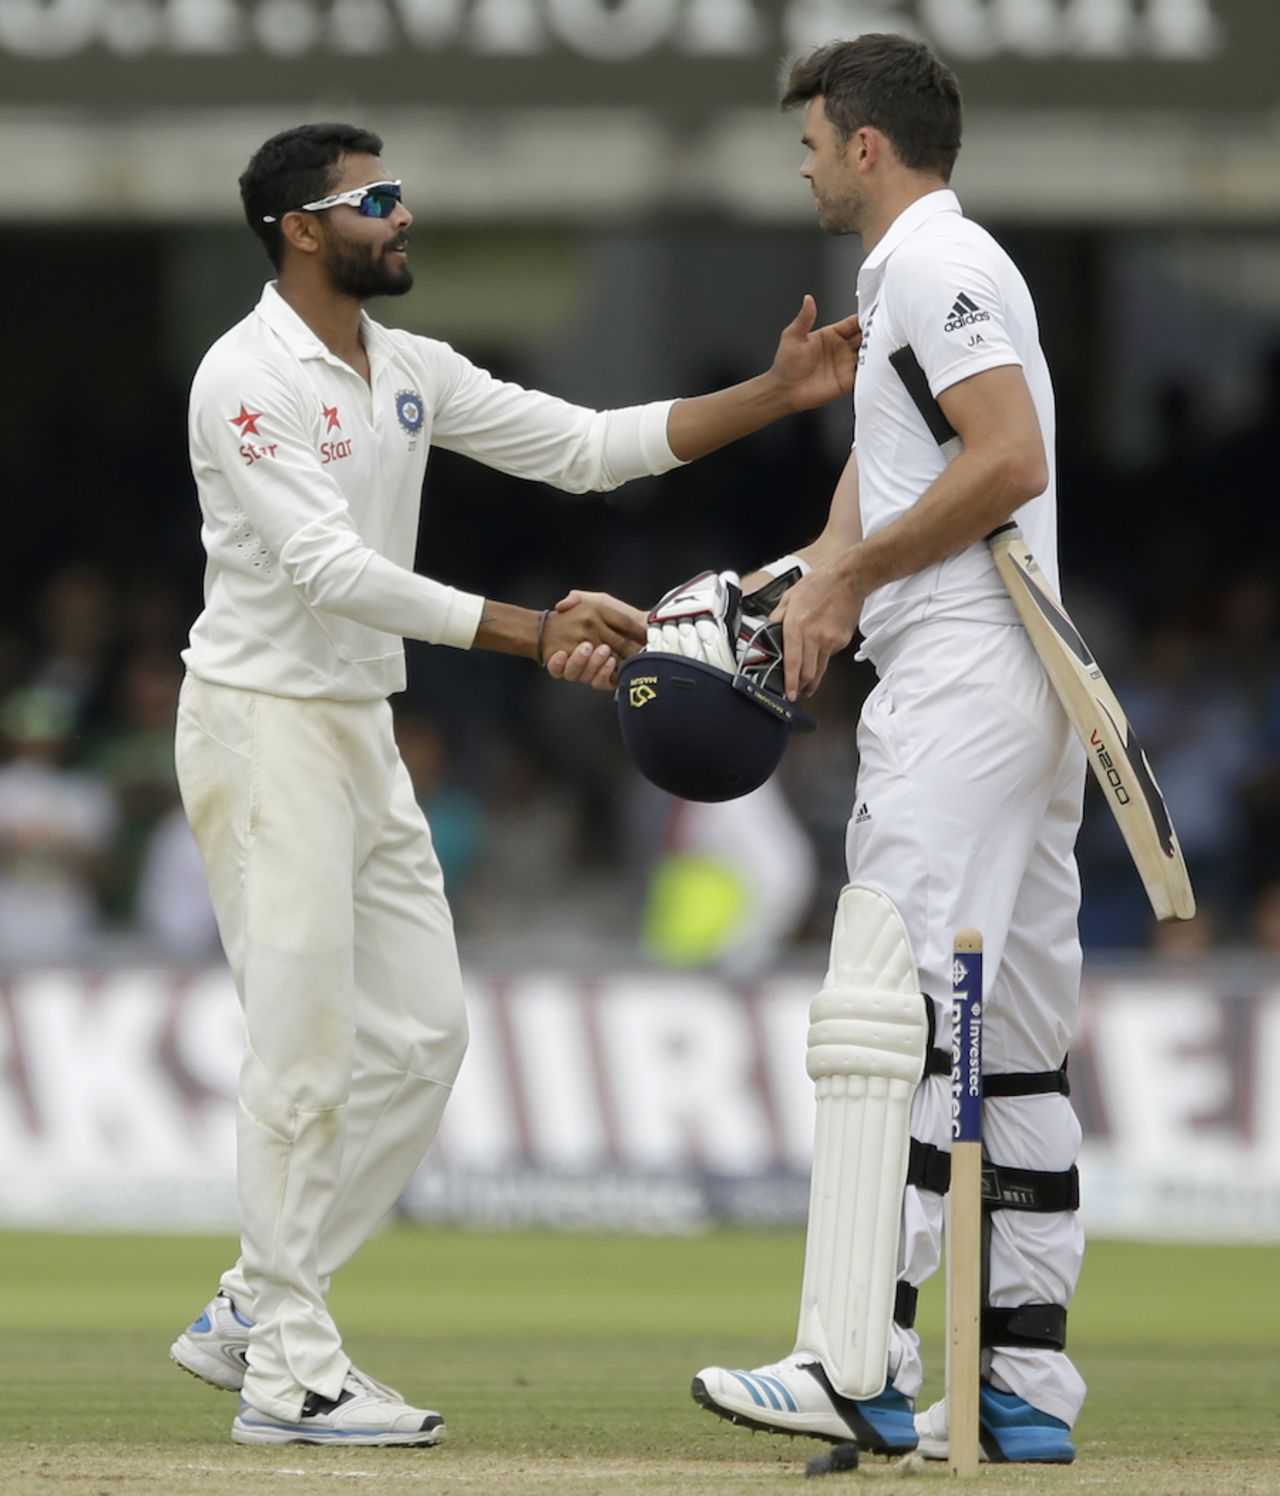 Ravindra Jadeja shakes hands with James Anderson after the win, England v India, 2nd Investec Test, Lord's, 5th day, July 21, 2014